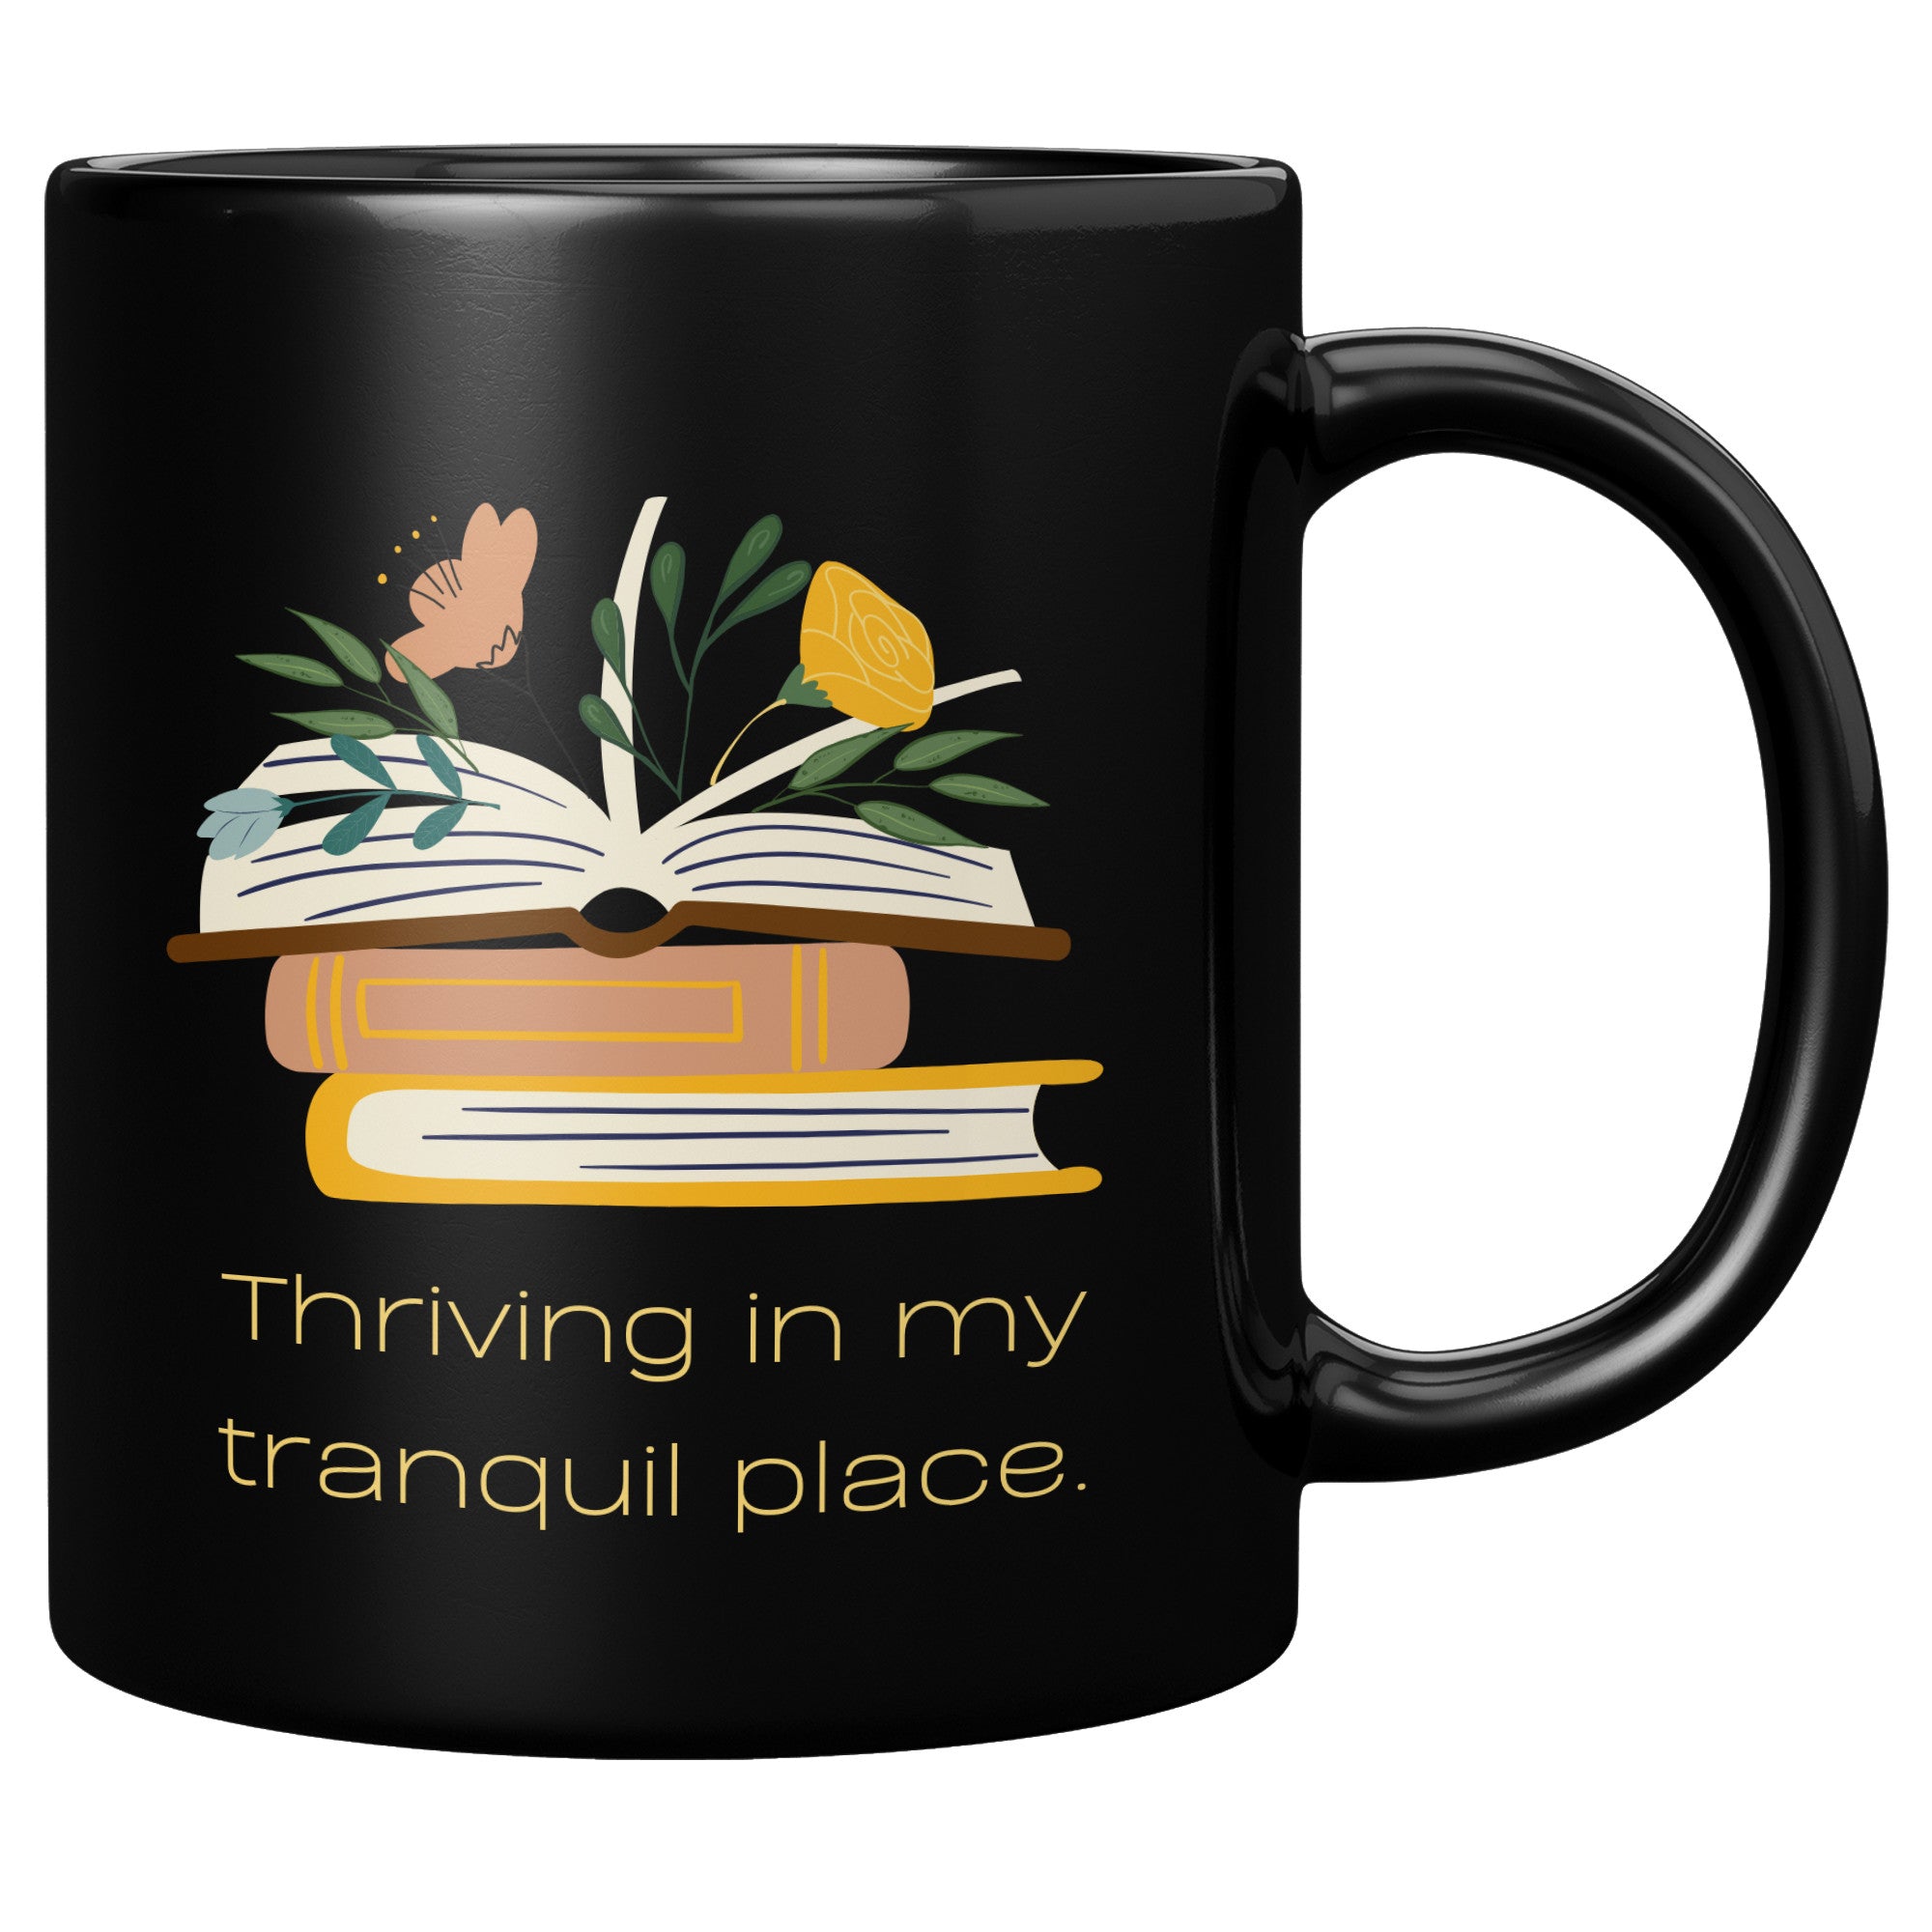 Affirmation Mug: T1-Thriving in My Tranquil Place.